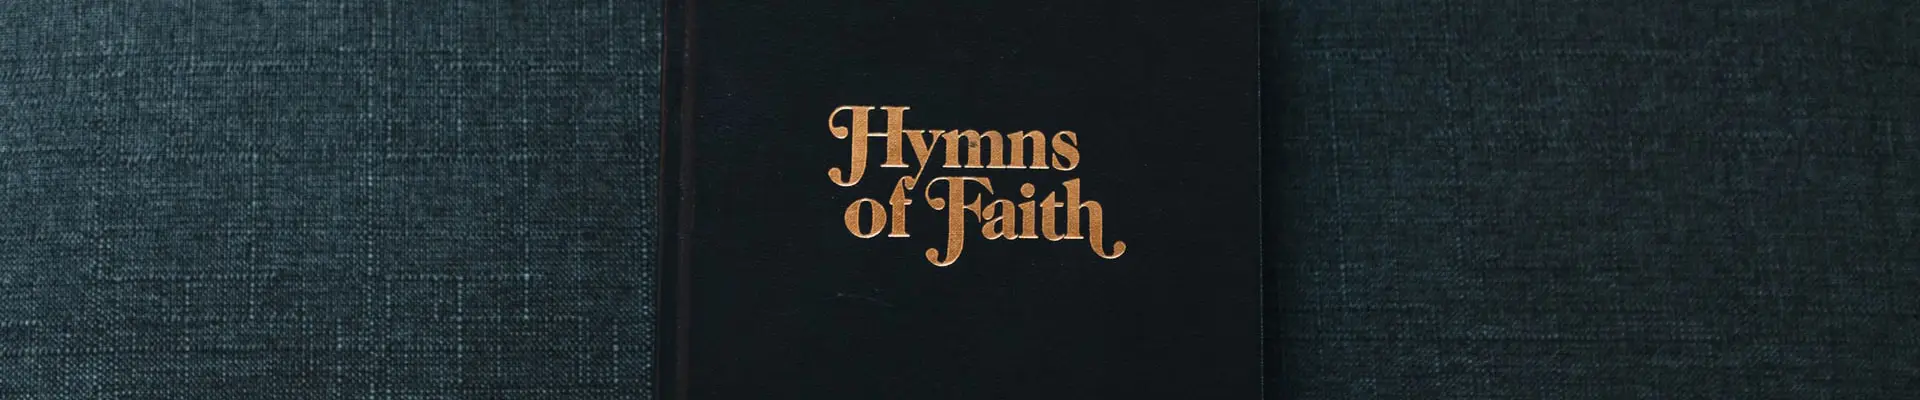 Hymns Resources and Liturgical Music Resources.